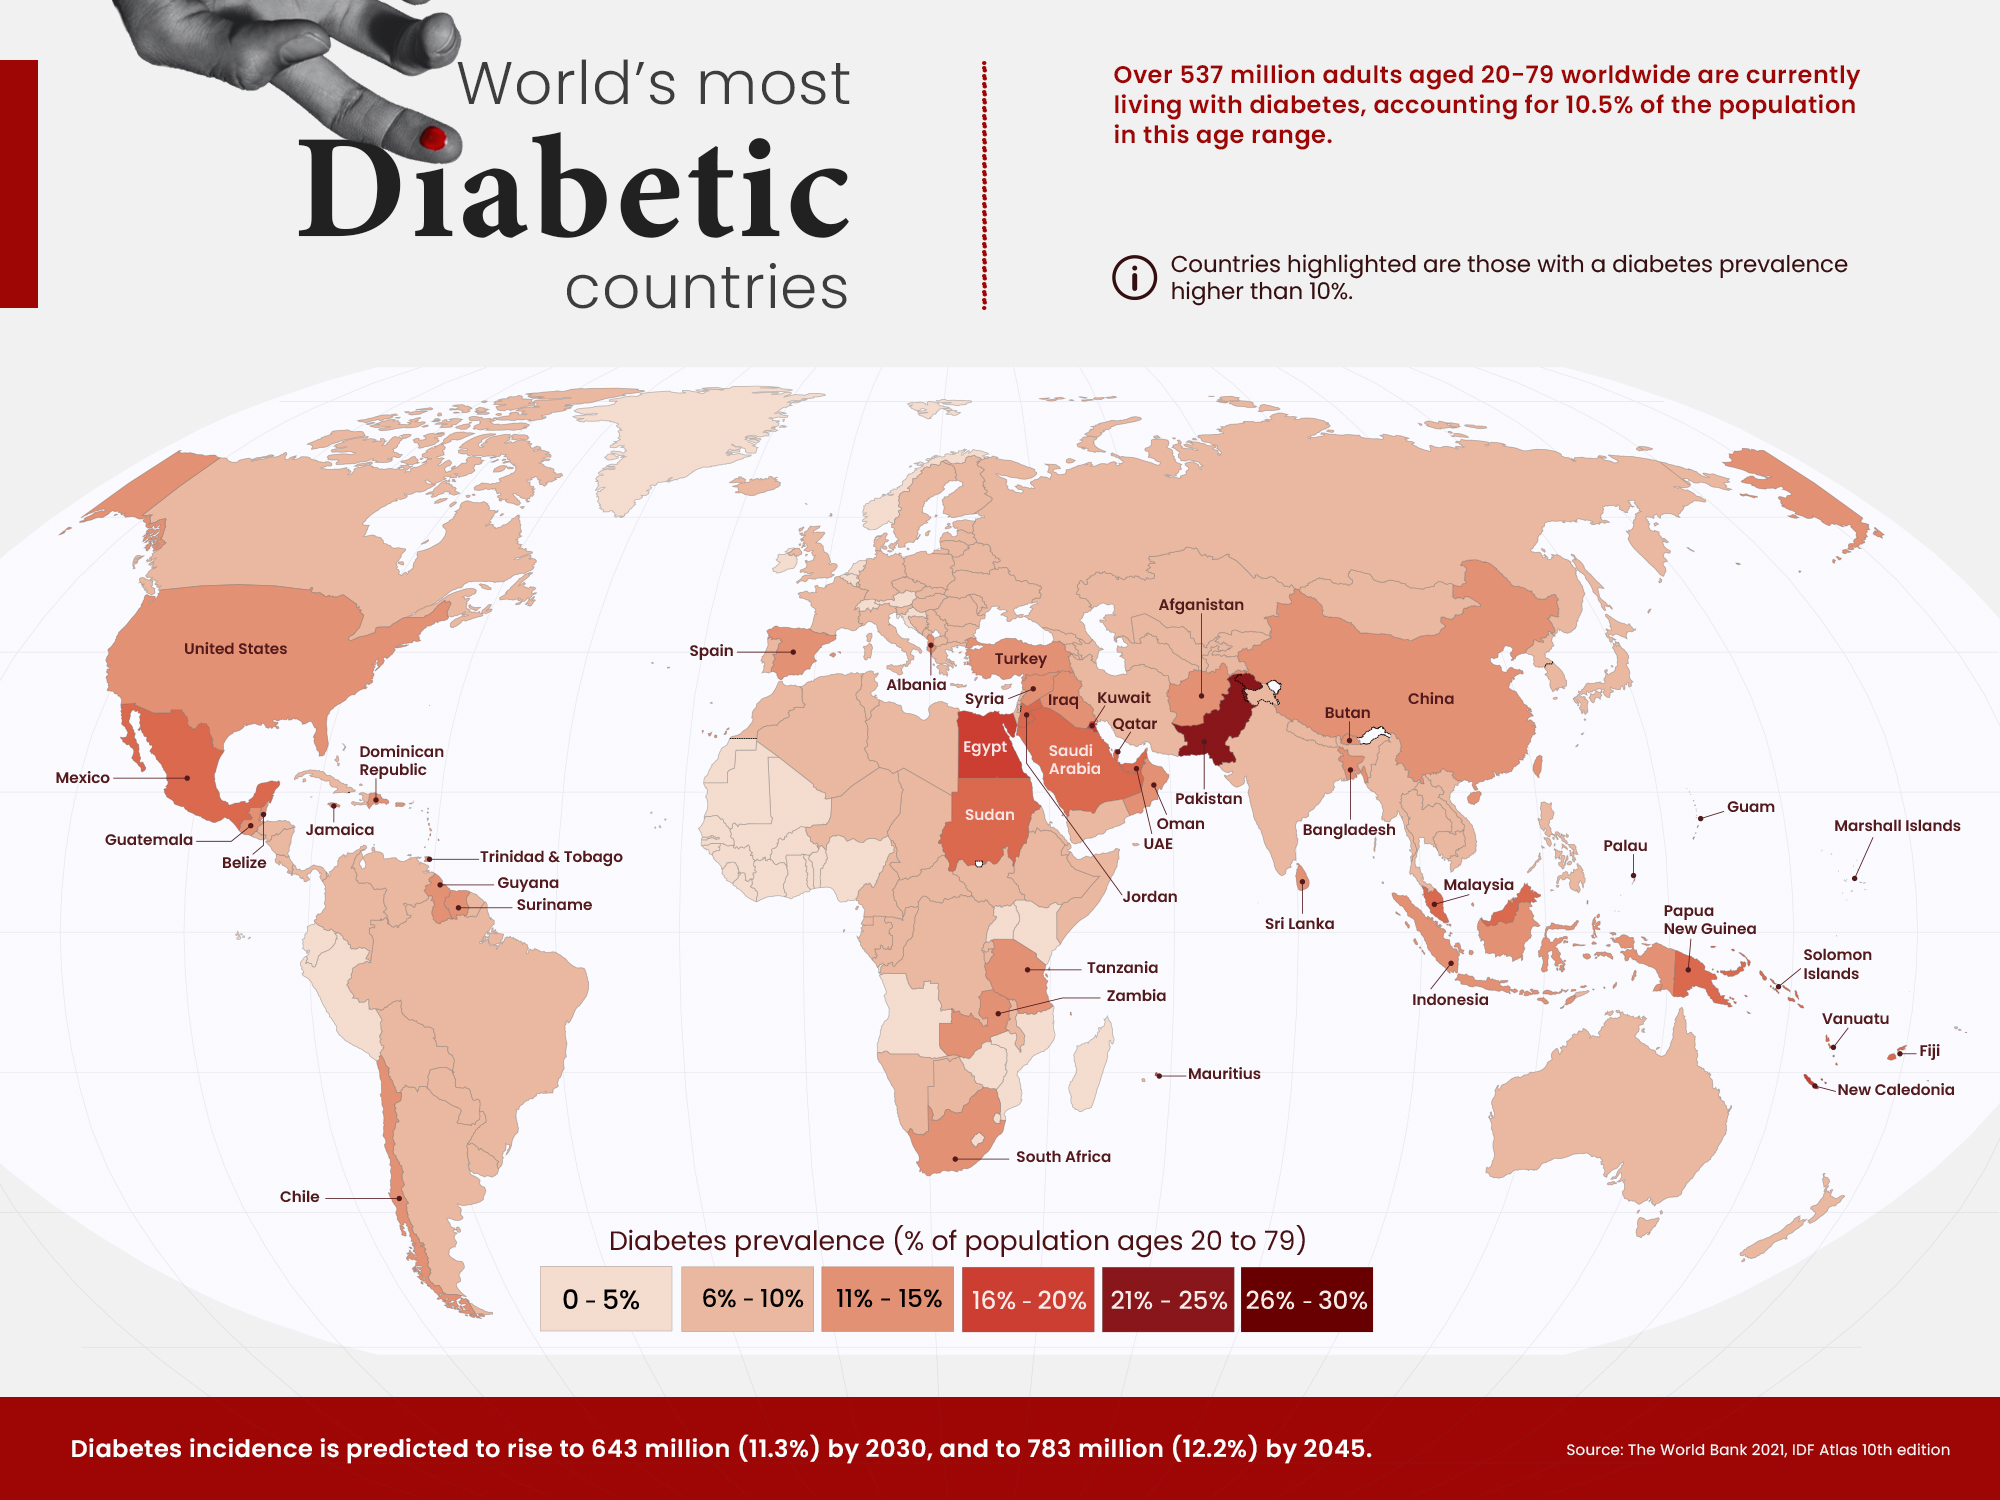 Diabetes has become a global health concern, affecting millions of people around the world.